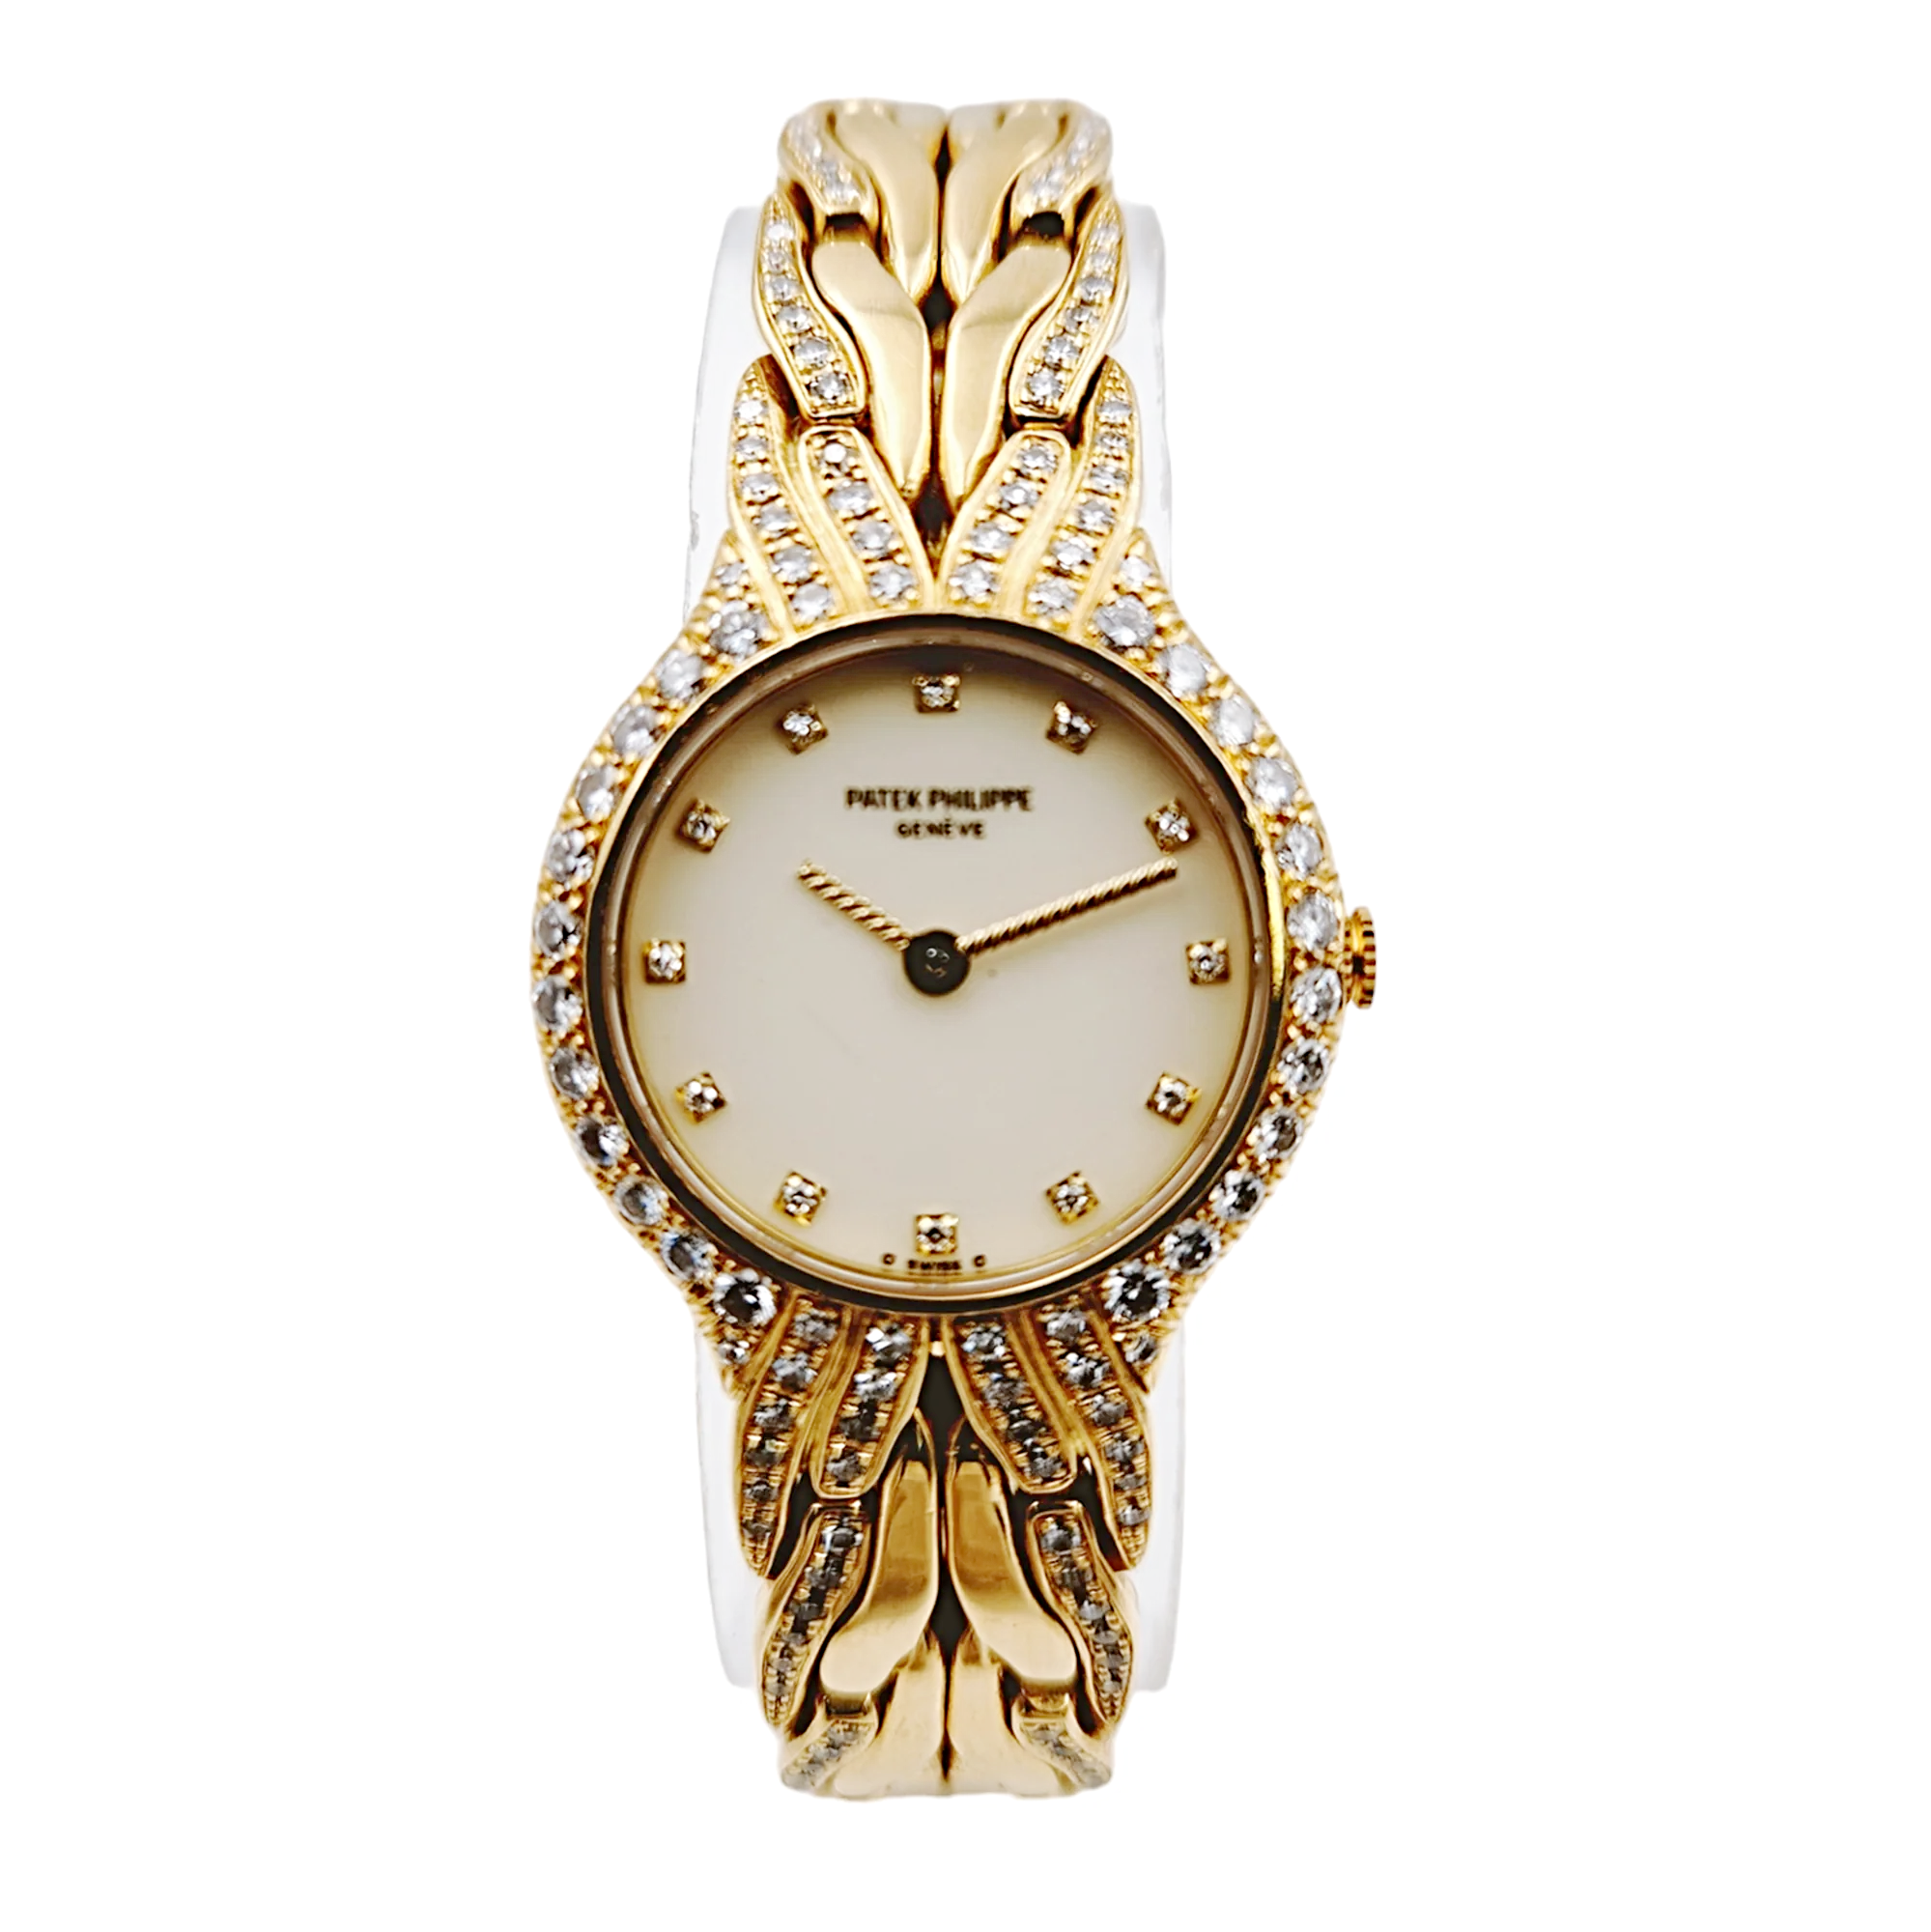 Ladies Patek Philippe 23mm La Flamme 18K Yellow Gold Watch with Cream Diamond Dial and Diamond Bezel. (Pre-Owned Model 4816/3)